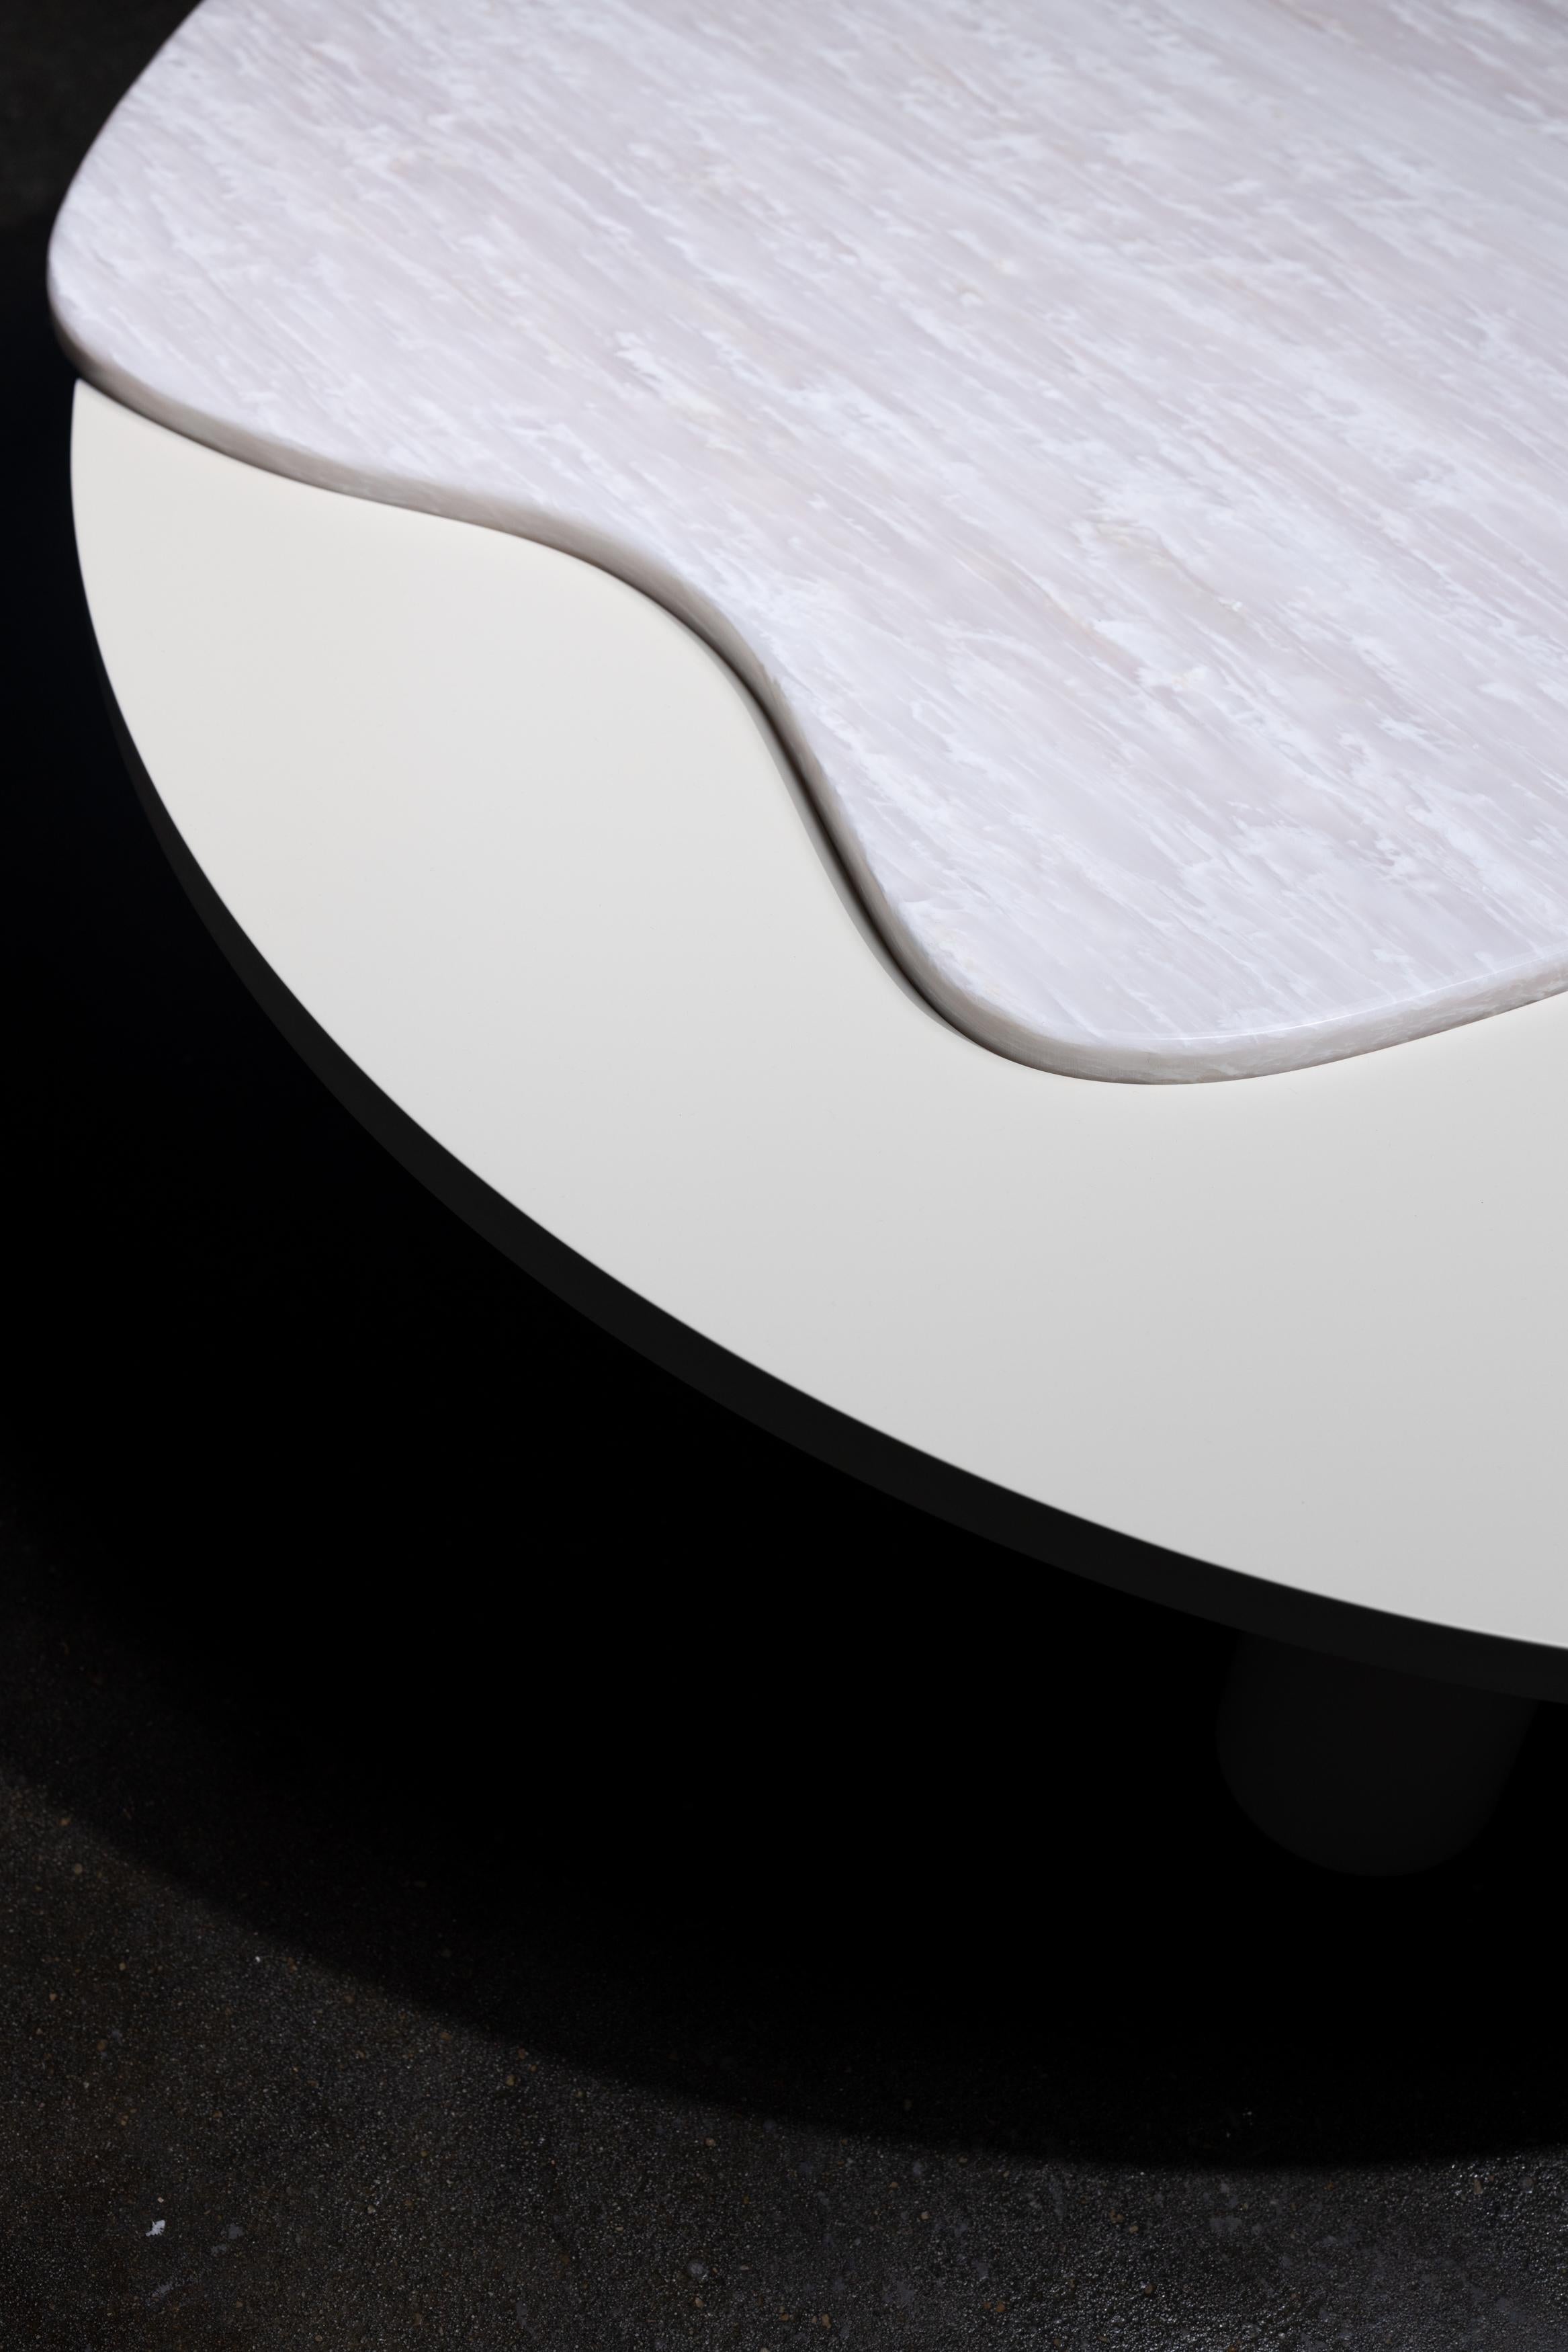 Organic Modern Bordeira Coffee Tables Marble Handmade in Portugal by Greenapple For Sale 4